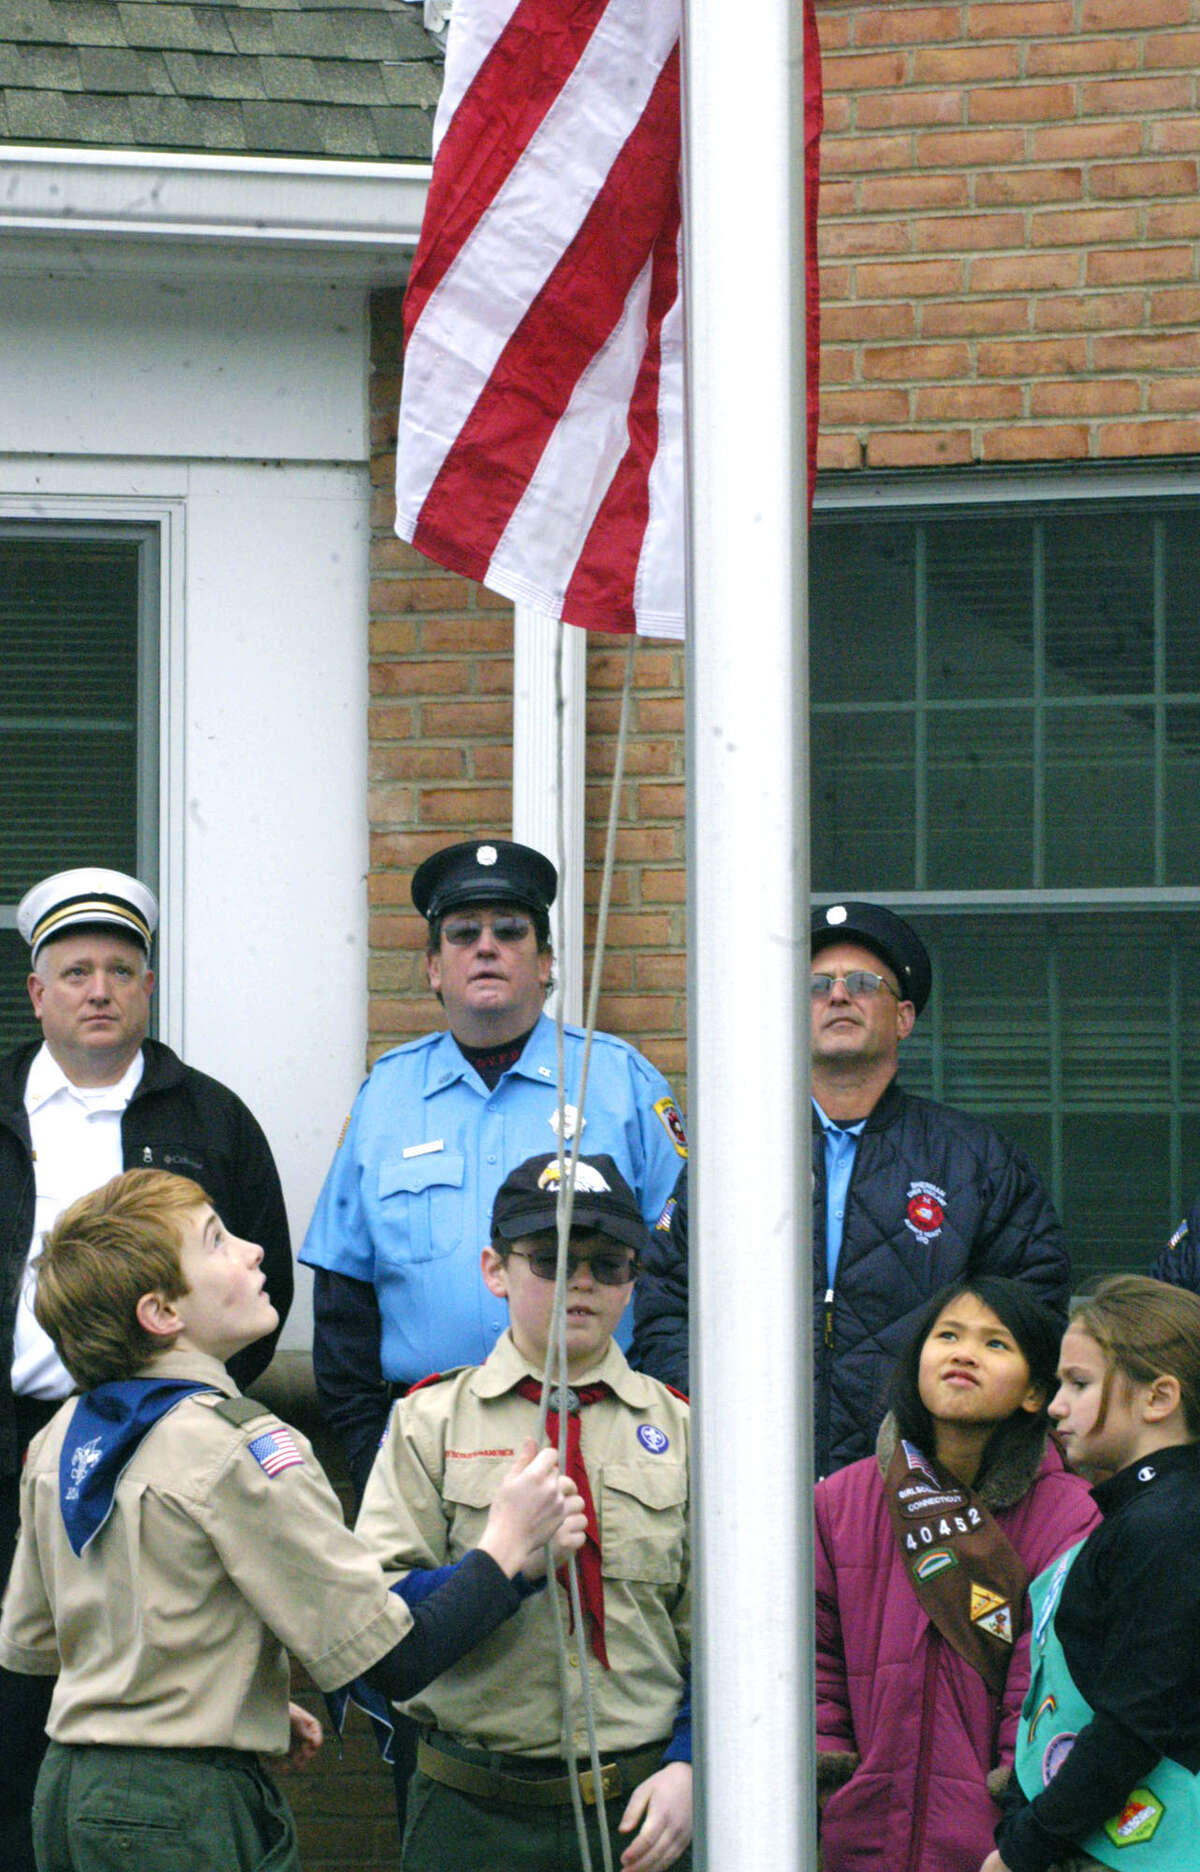 Boy Scouts and Girls Scouts participate in the flag-raising ceremony to kick off Sherman's Dec. 8, 2013 festivities celebrating the official opening of the town's renovated and expanded firehouse, now known as the emergency services facilty. The youths are, from left to right, Michael Tarby, Patrick Dwyer, Micayla Tarby and Molly Fazzone. Active in the ceremony but not shown are Andy Fazzone and Nick and Brendan Sartori.